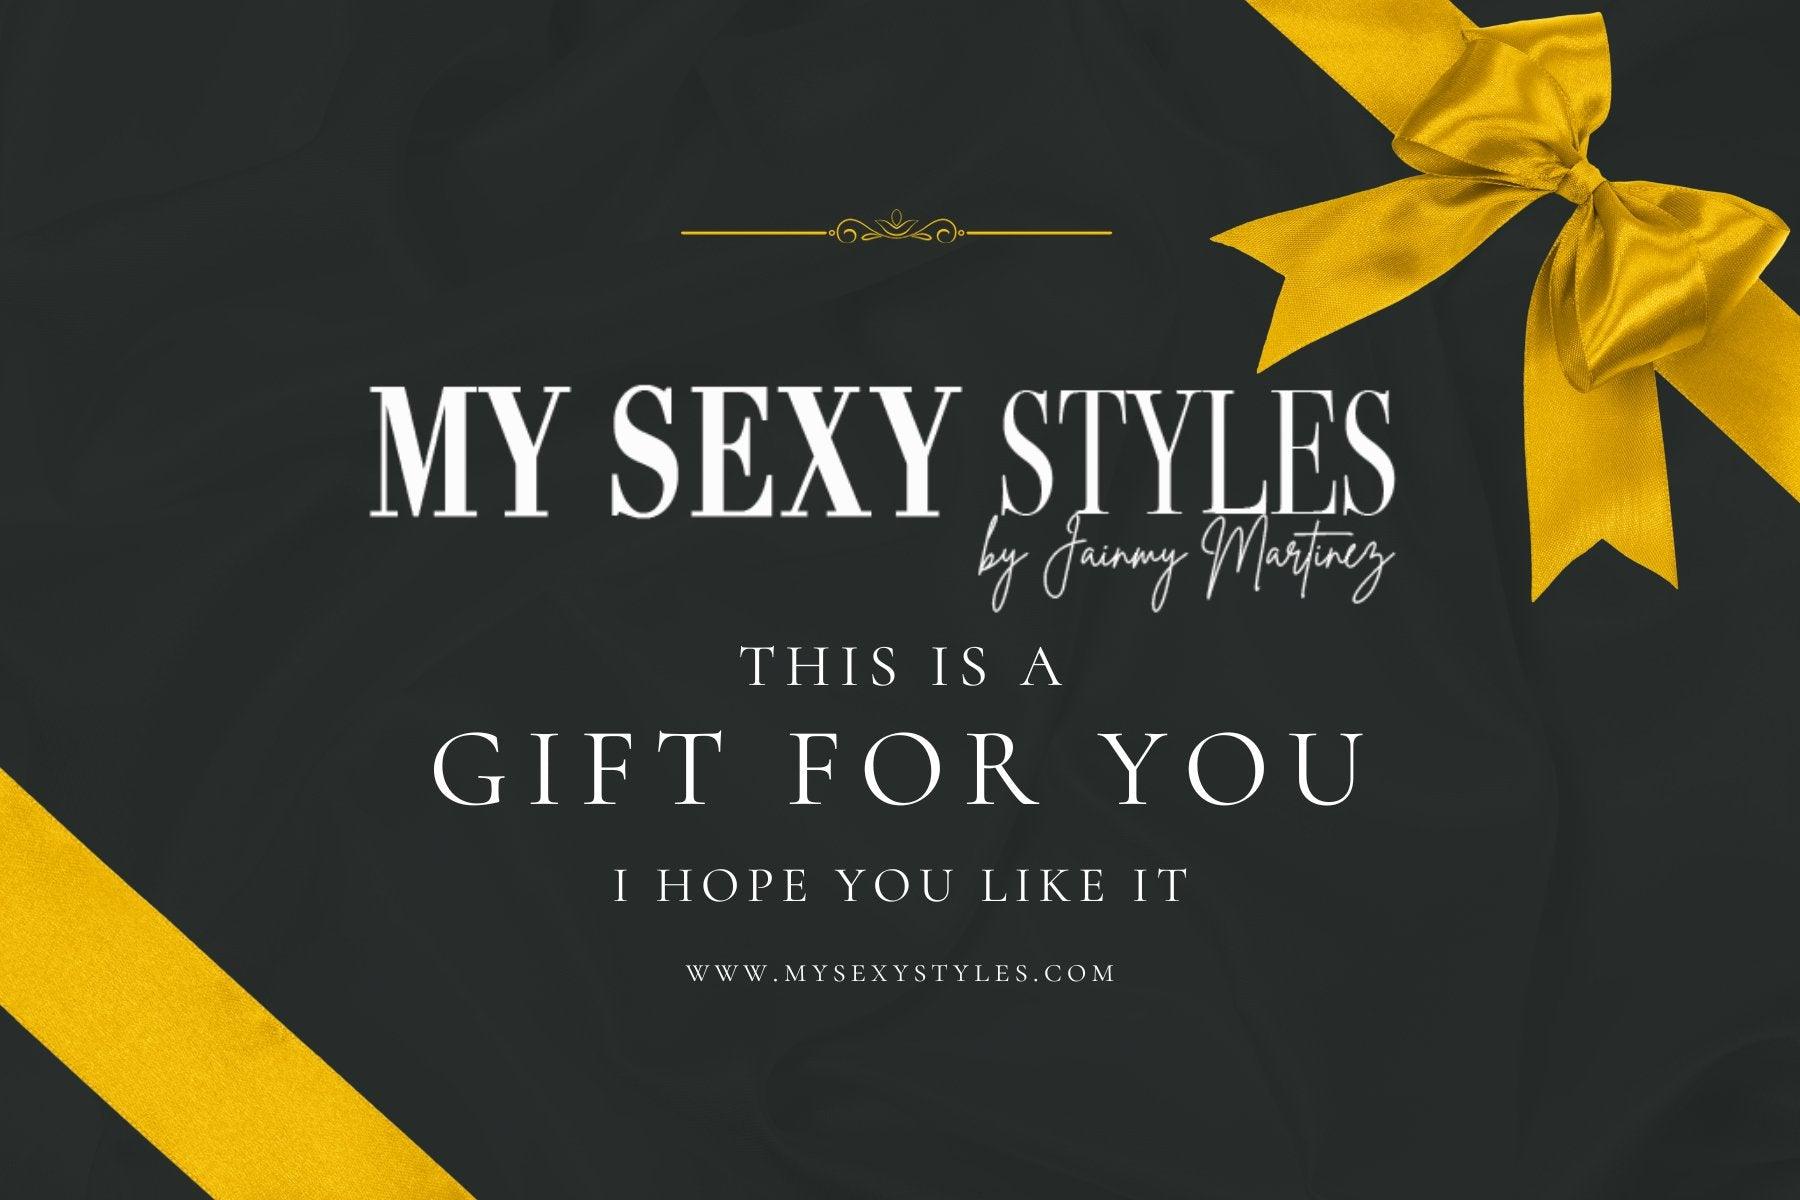 MY SEXY STYLES Gift Card - MY SEXY STYLES